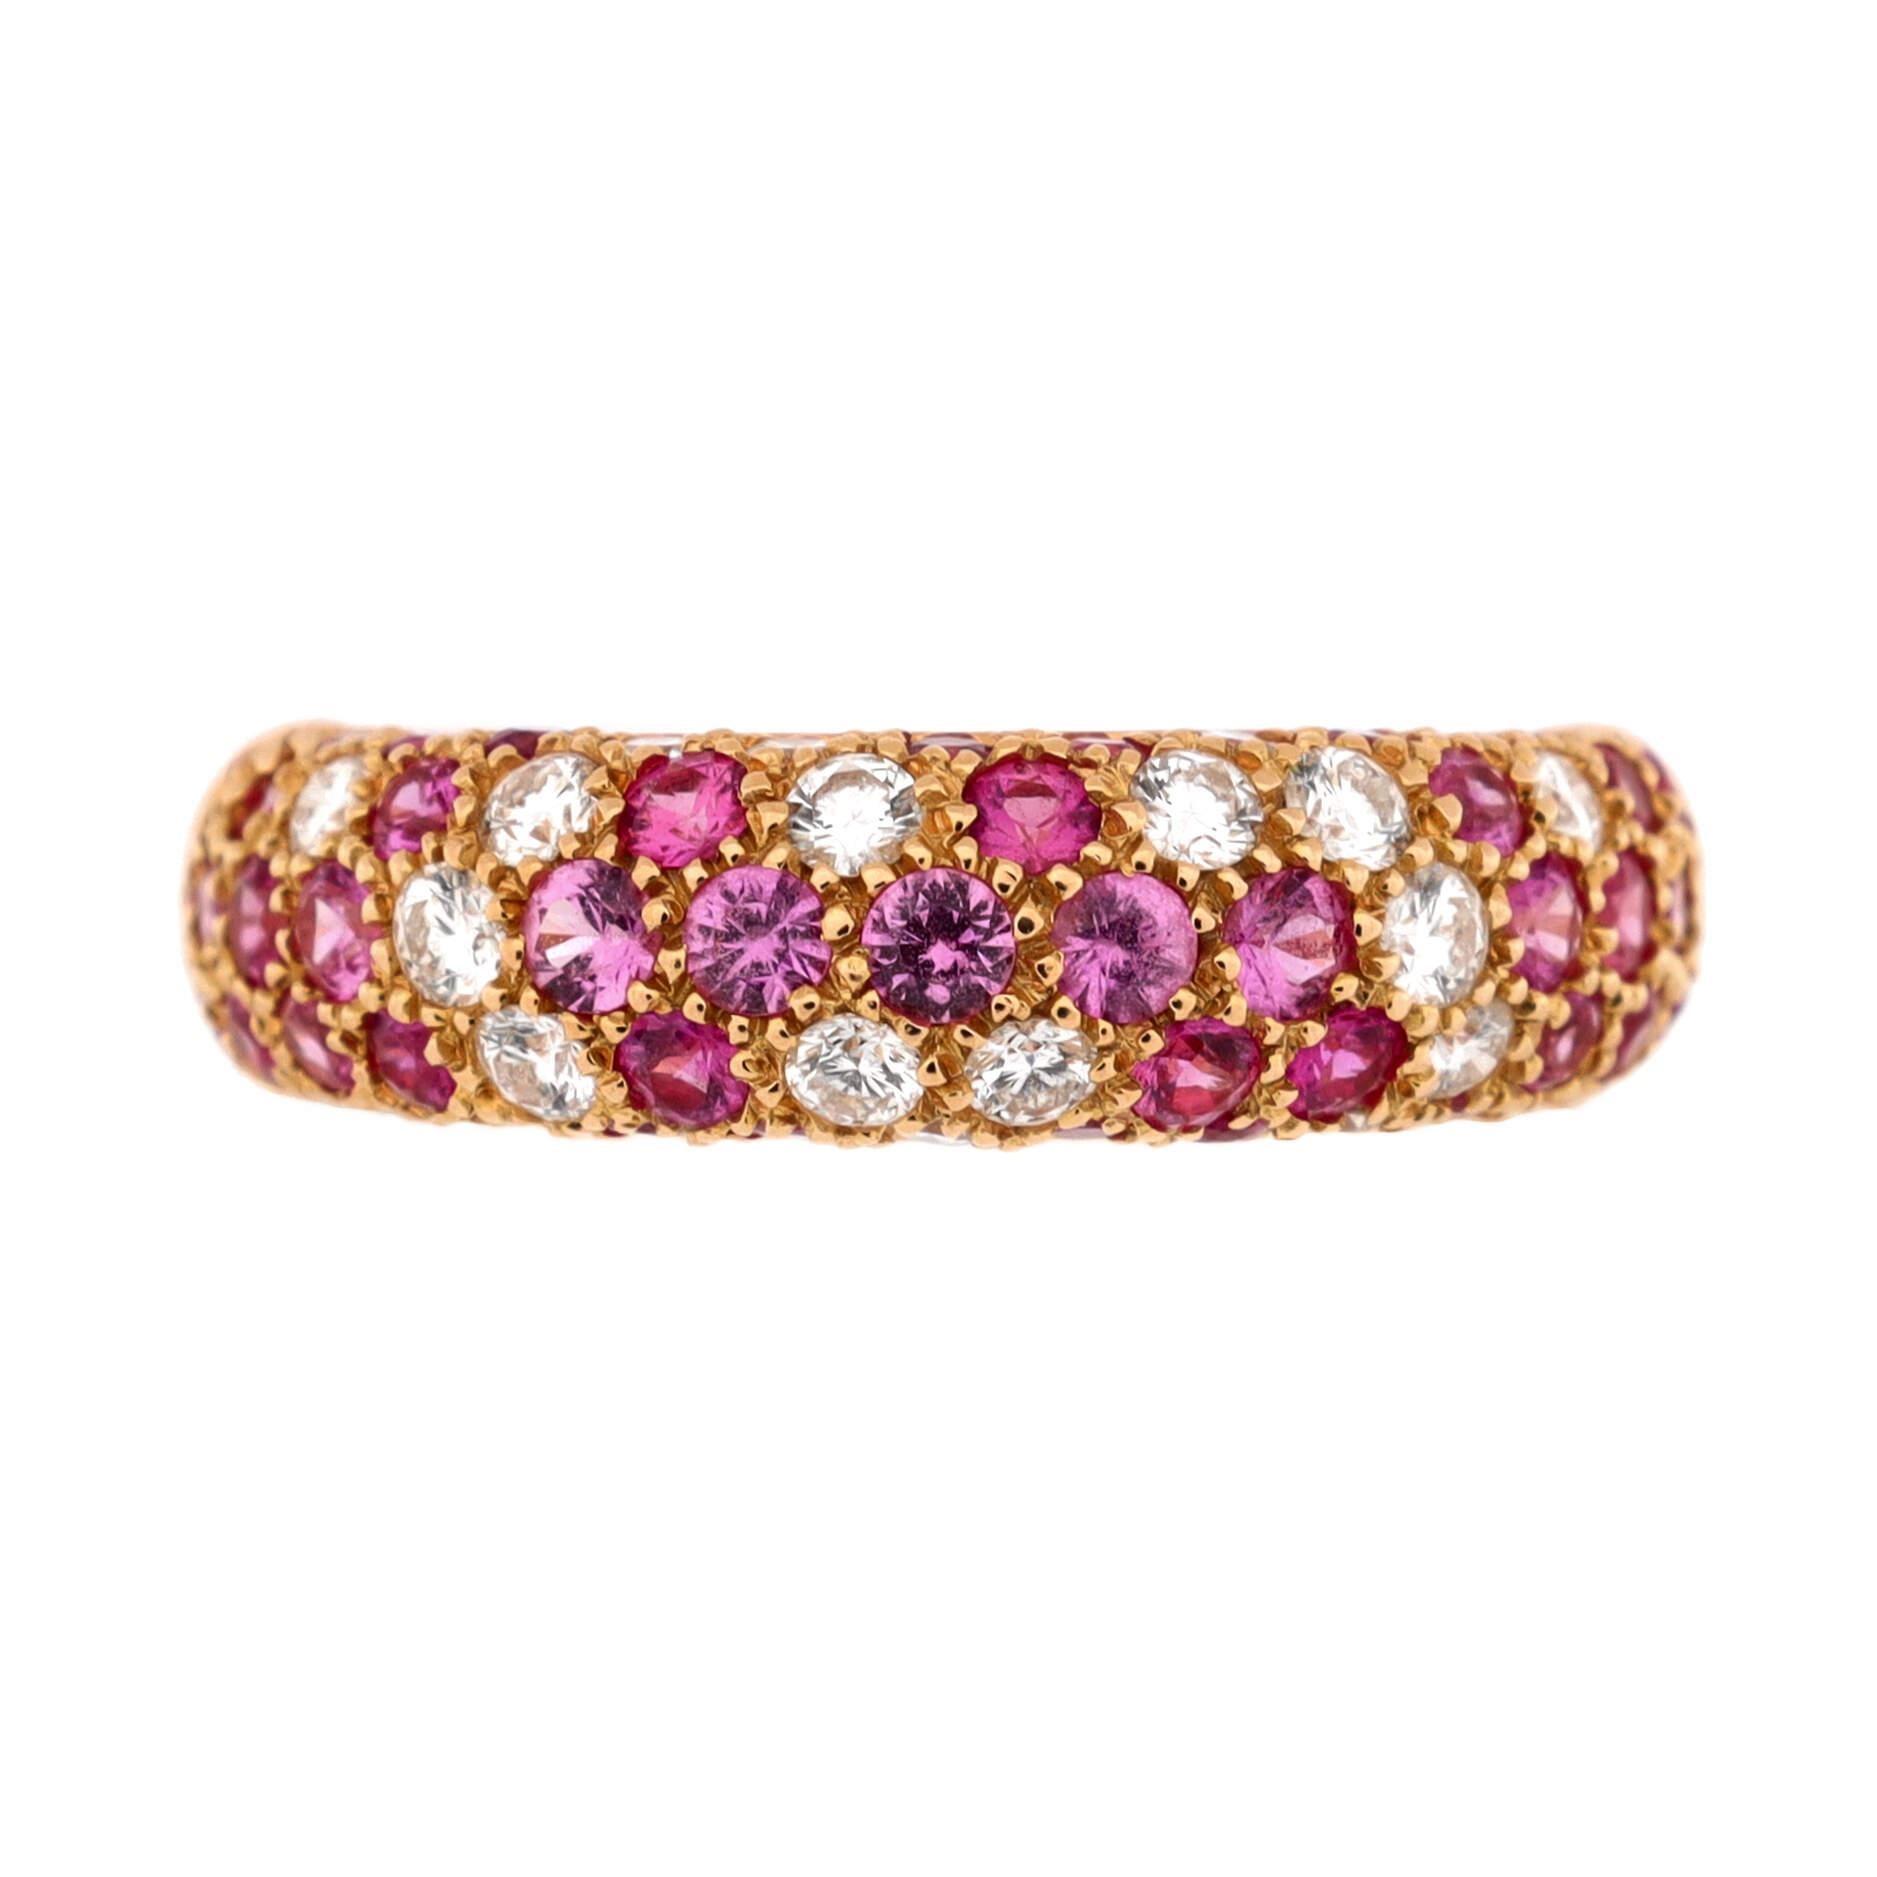 Condition: Very good. Moderate wear throughout.
Accessories: No Accessories
Measurements: Size: 5.75 - 51, Width: 4.20 mm
Designer: Cartier
Model: Mimi Pave Band Ring 18K Rose Gold with Sapphires and Diamonds
Exterior Color: Rose Gold
Item Number: